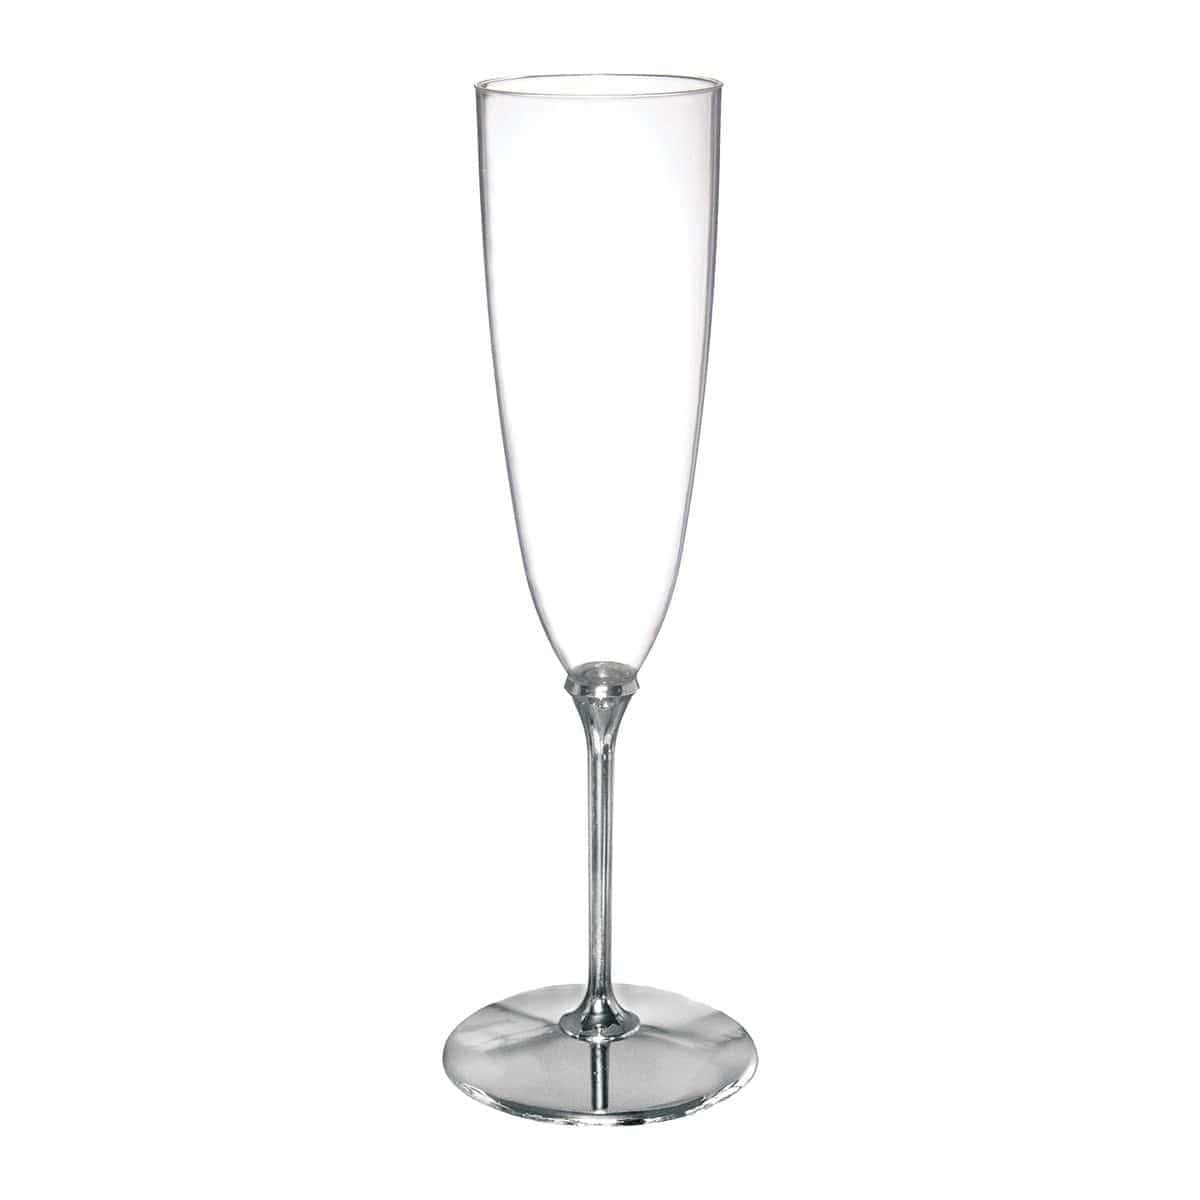 Buy Plasticware Metallic Silver Champagne Glasses, 8 Counts sold at Party Expert